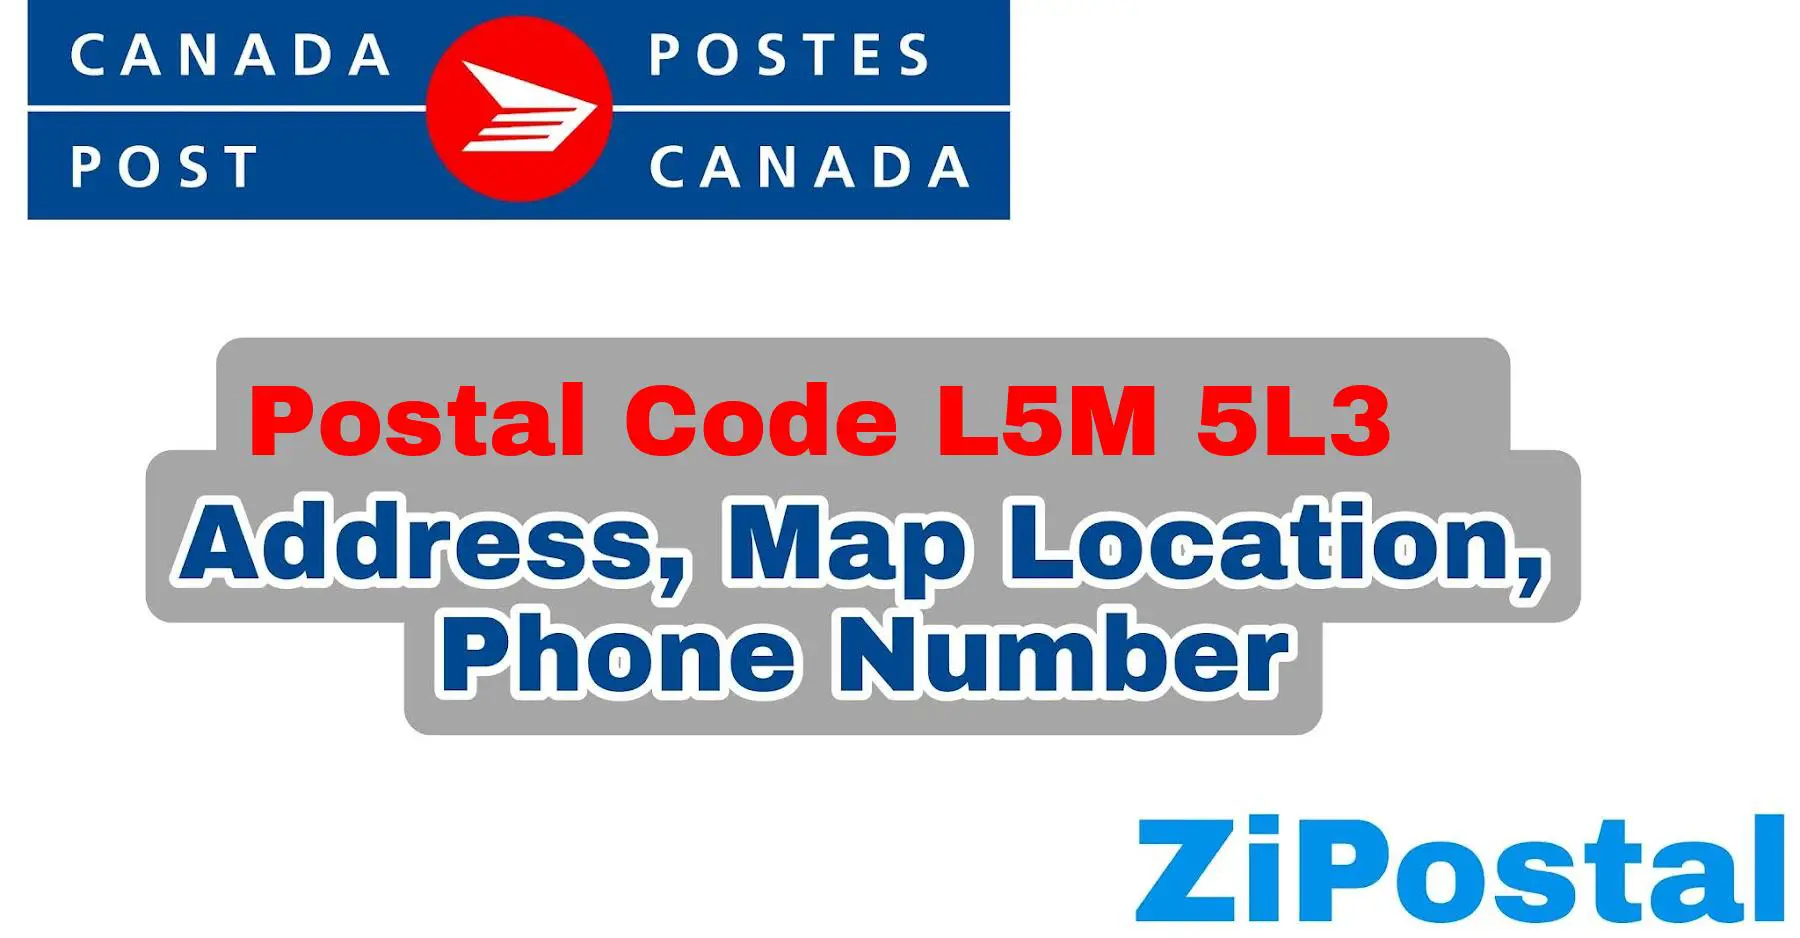 Postal Code L5M 5L3 Address Map Location and Phone Number